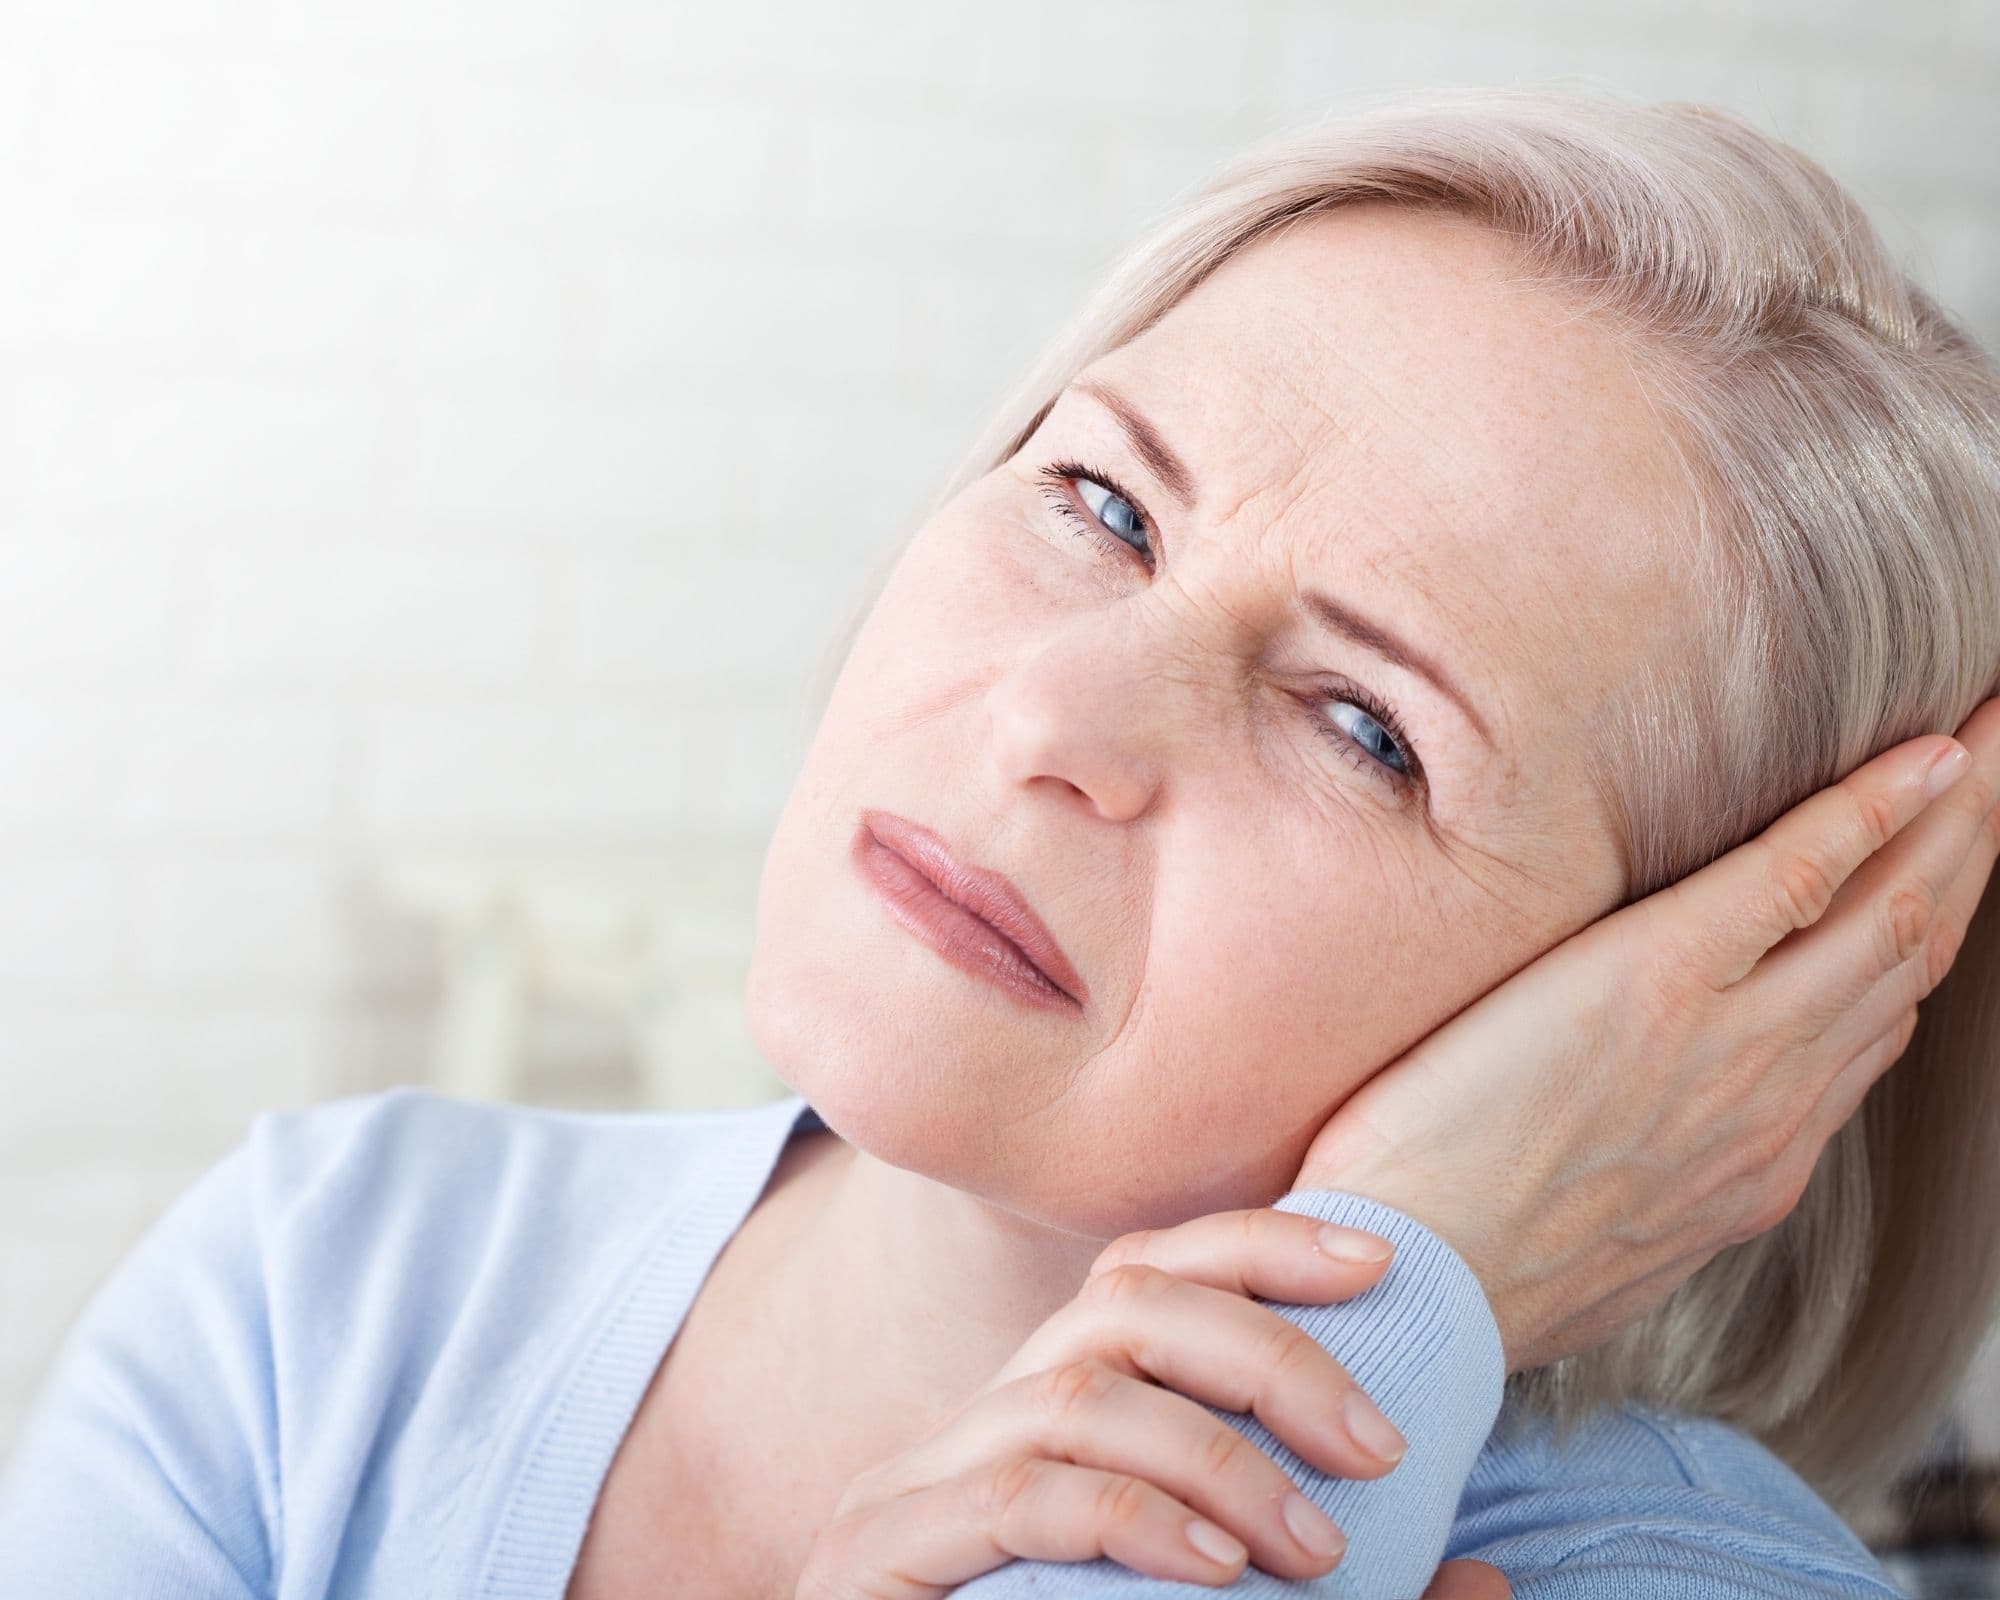 common reasons for ear pain